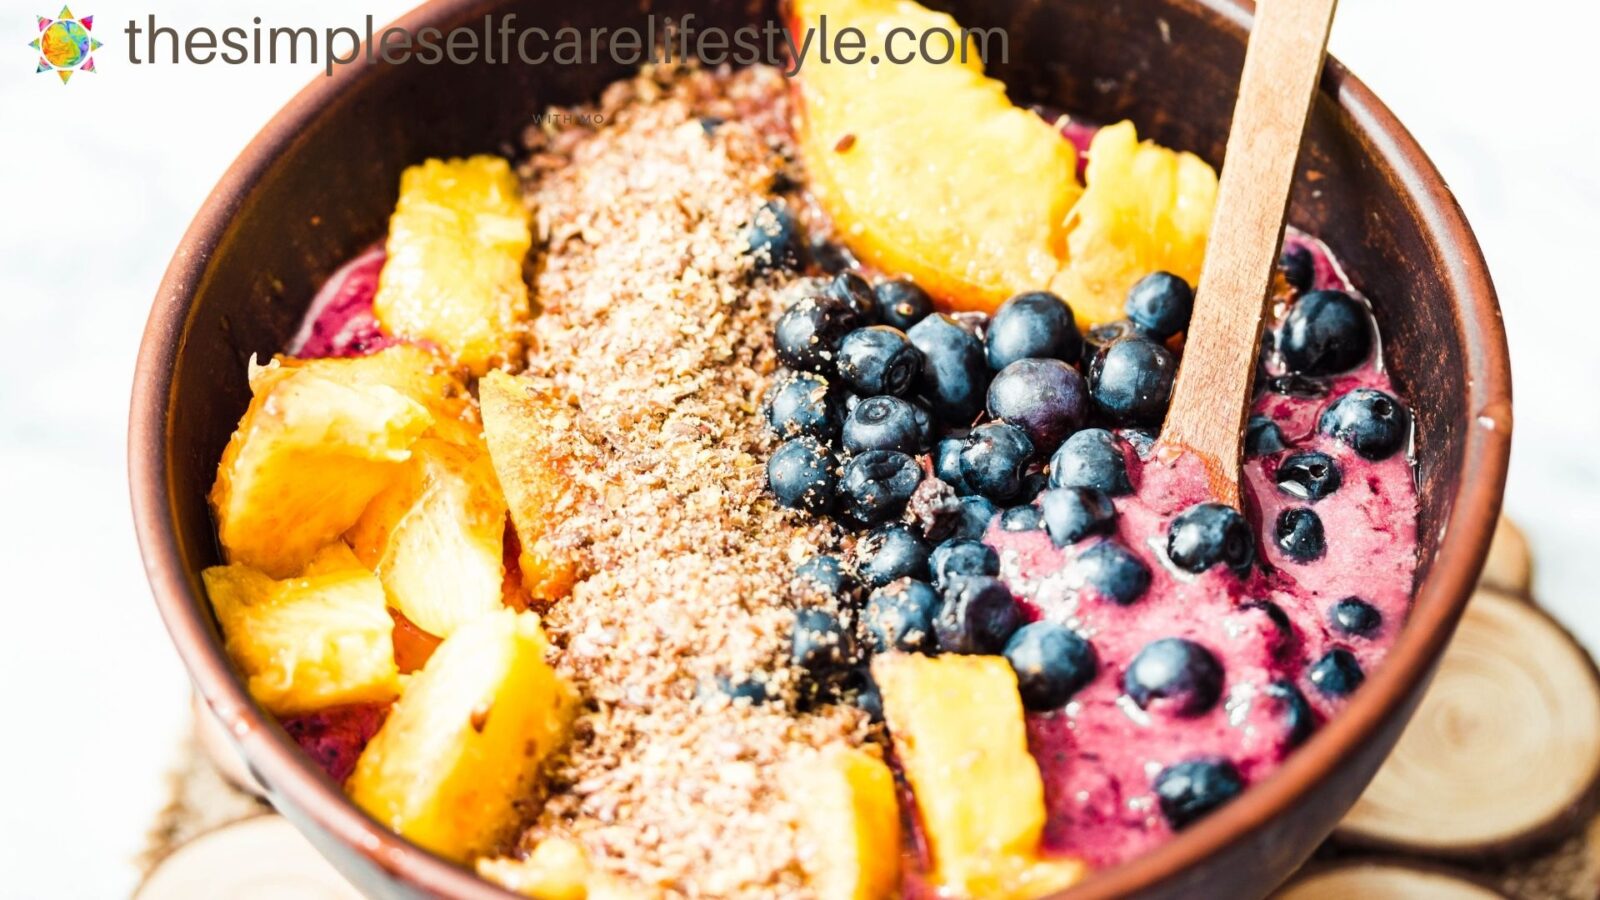 Flax is good for sprinkling on a smoothie bowl